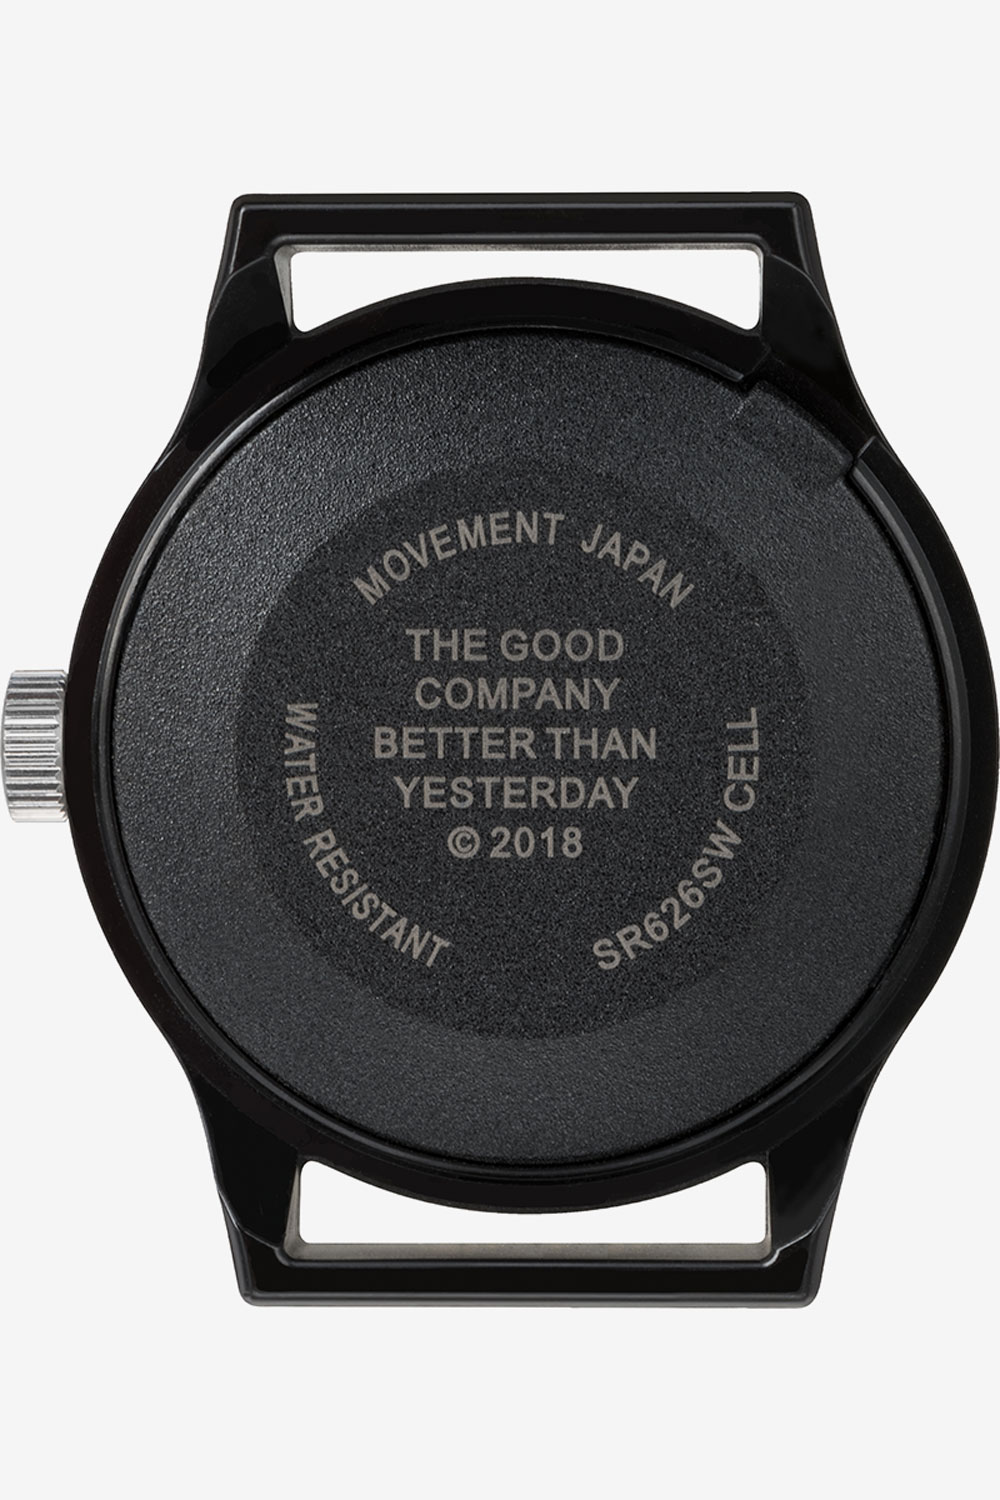 The Good Company & TIMEX Dropped a Limited Edition MK1™ Watch